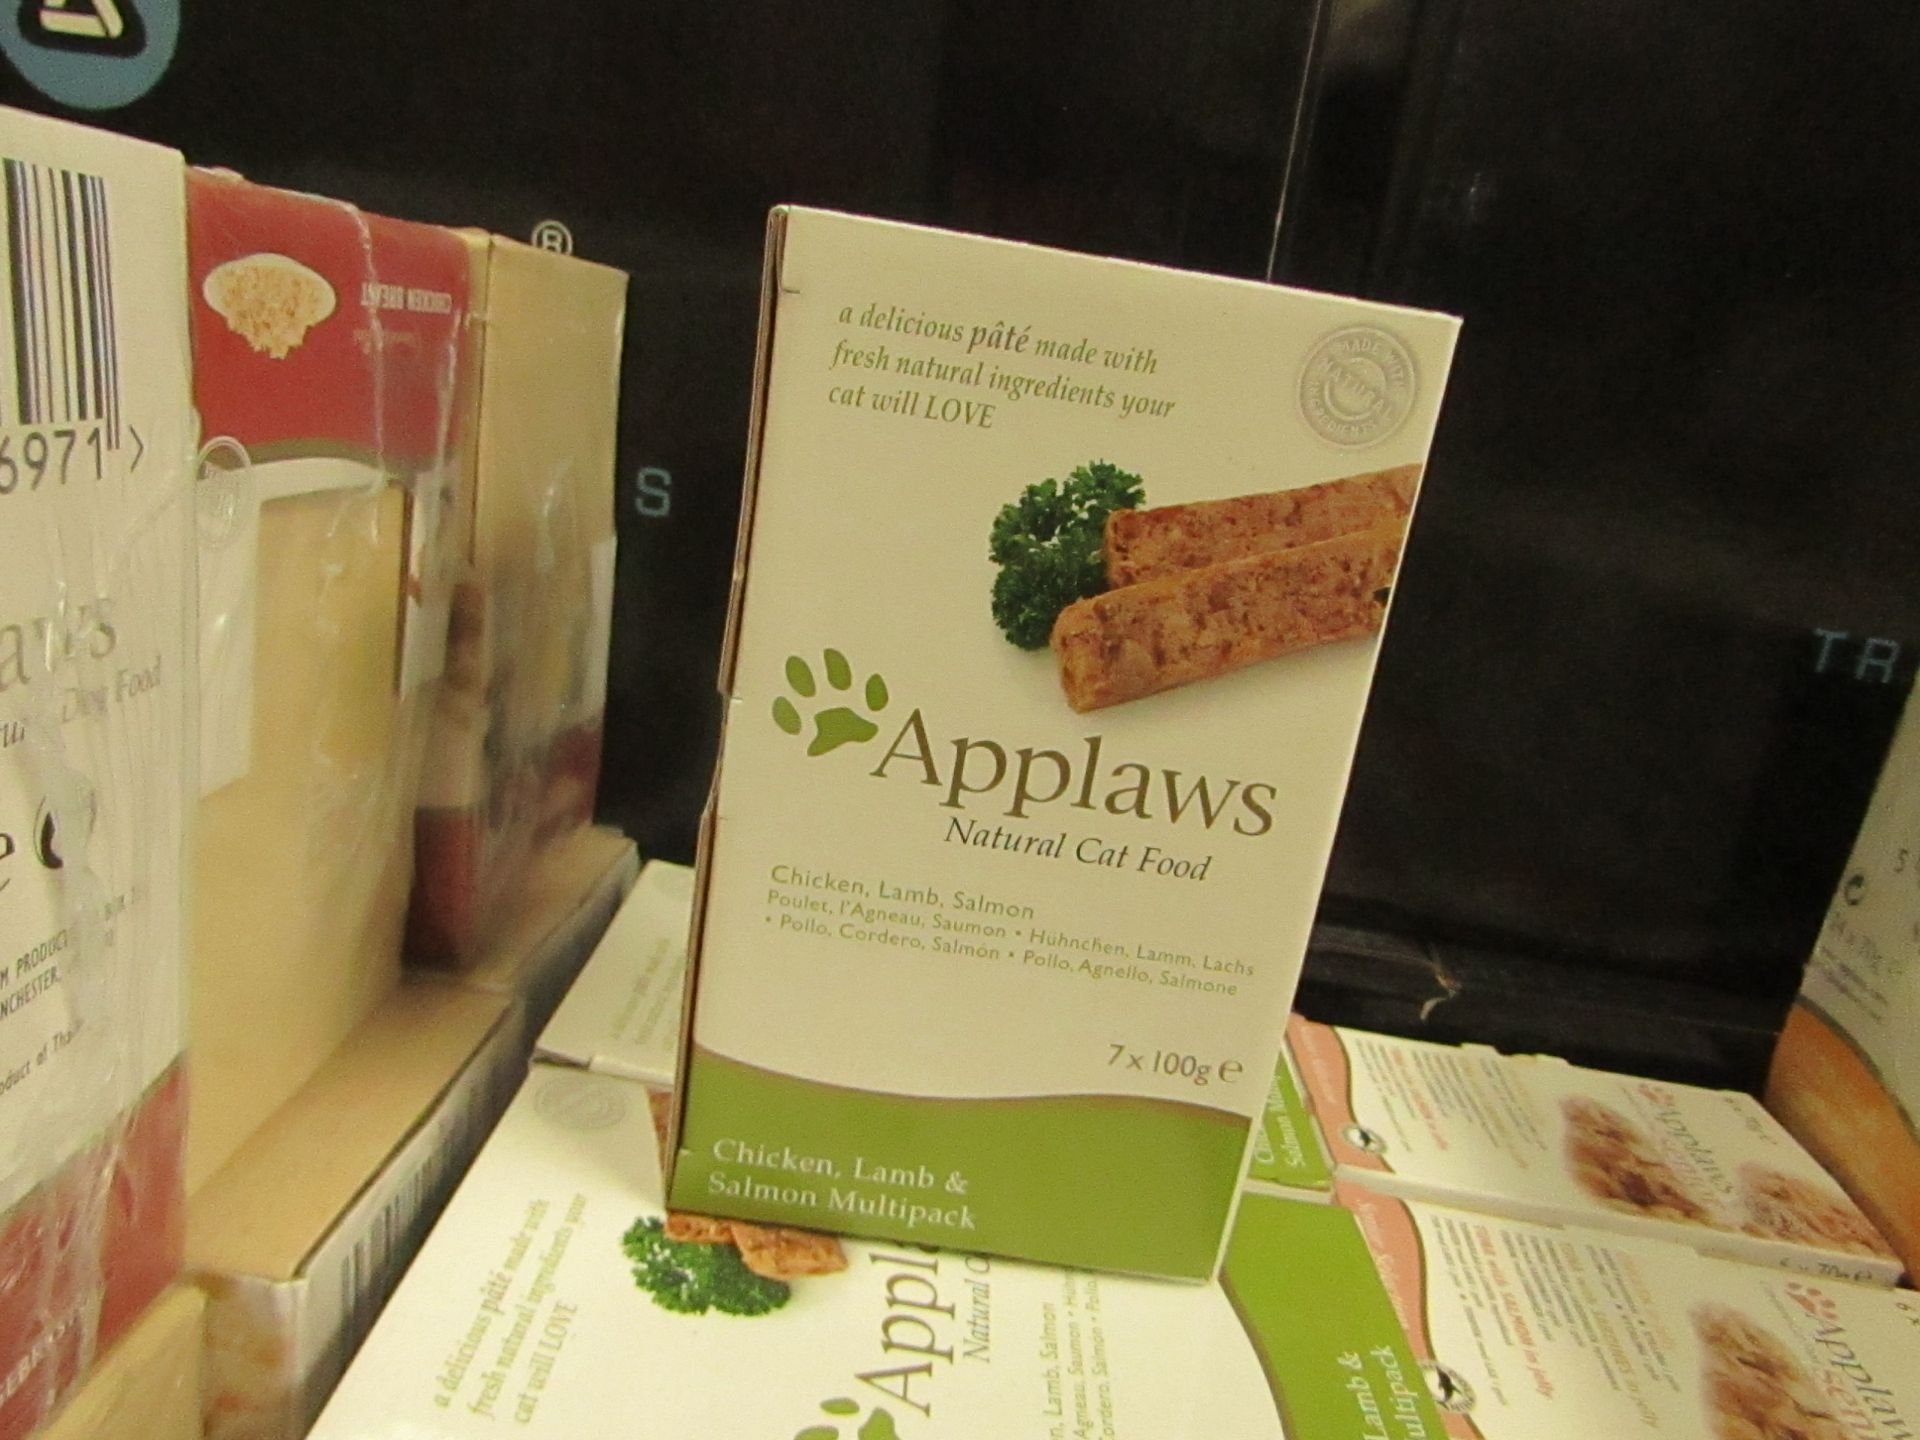 2x Boxes of 7x 100g tins of Applaws Chicken, Lamb and Salmon Multi pack Pate Natural Cat Food (